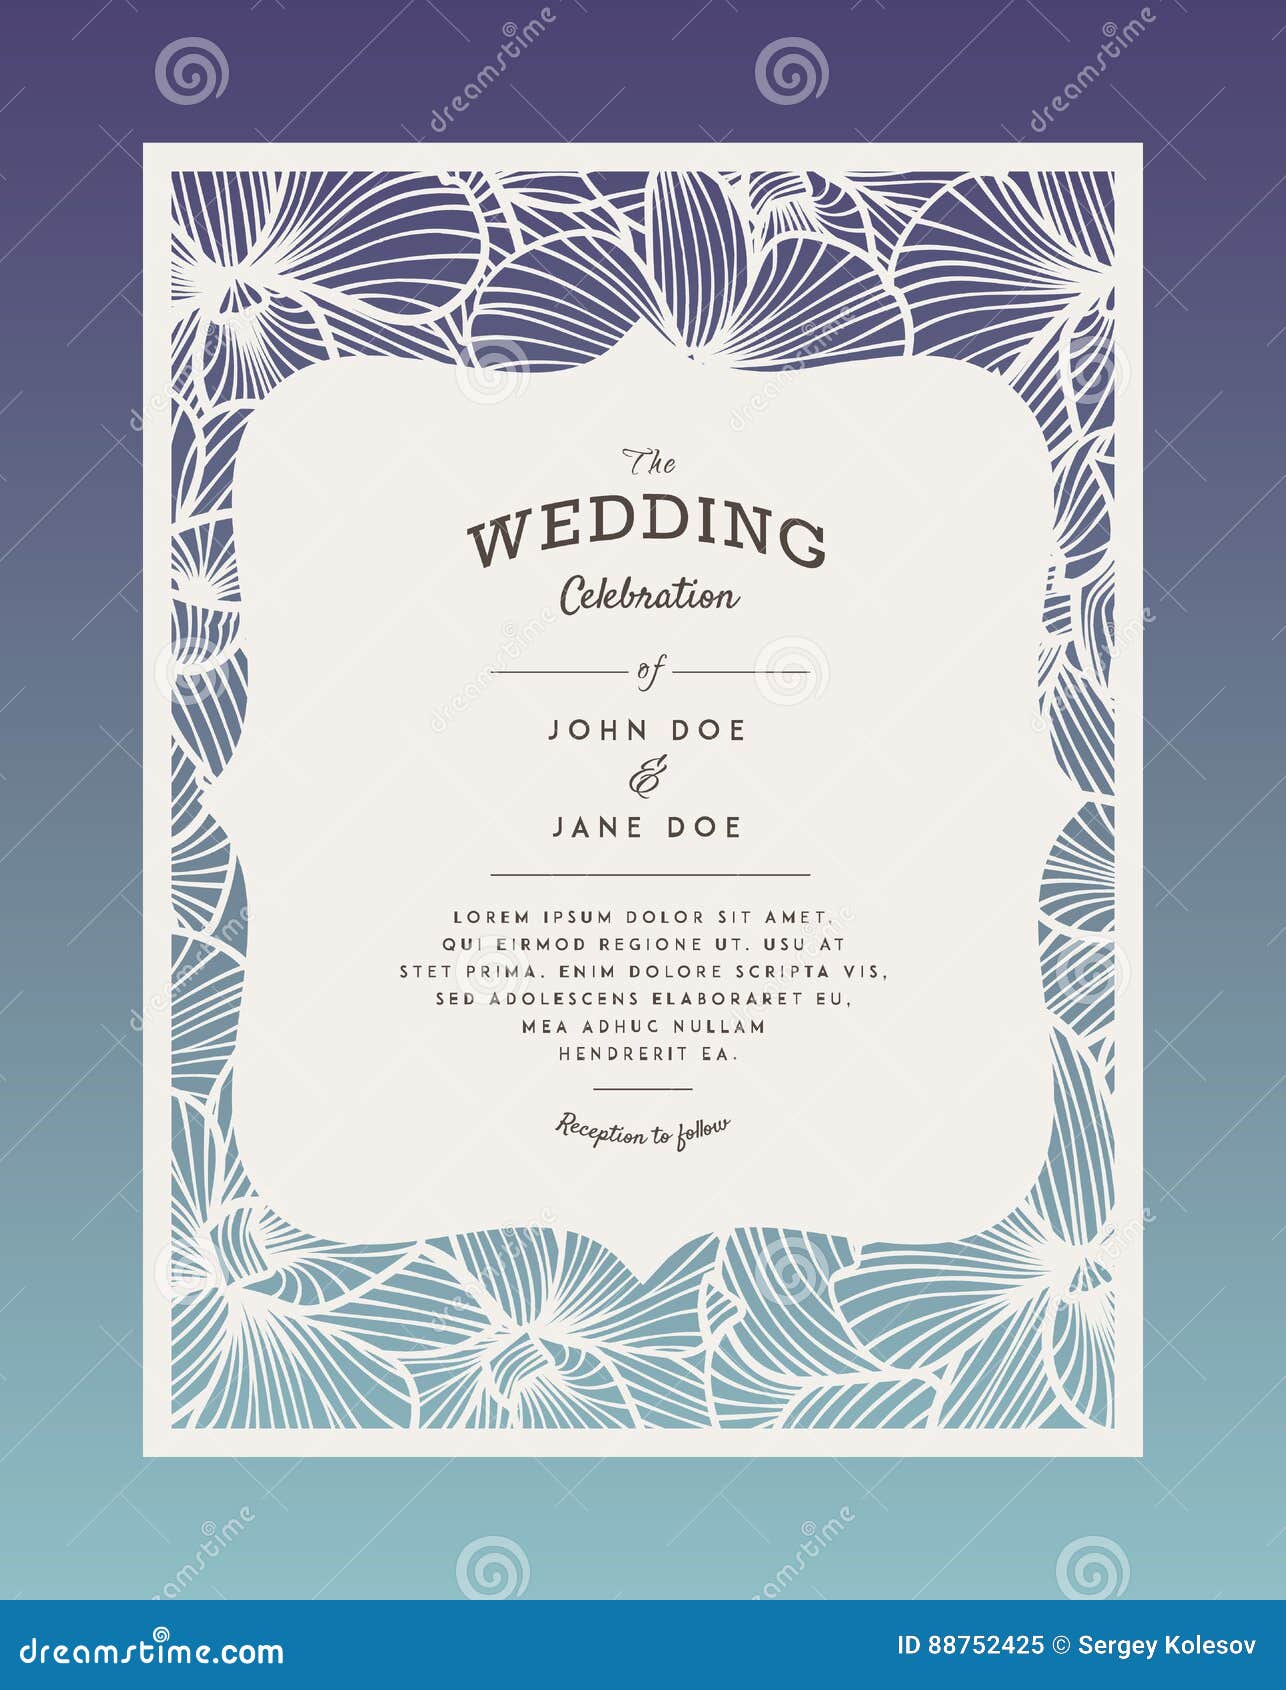 His and hers wedding day invitations lettering Vector Image